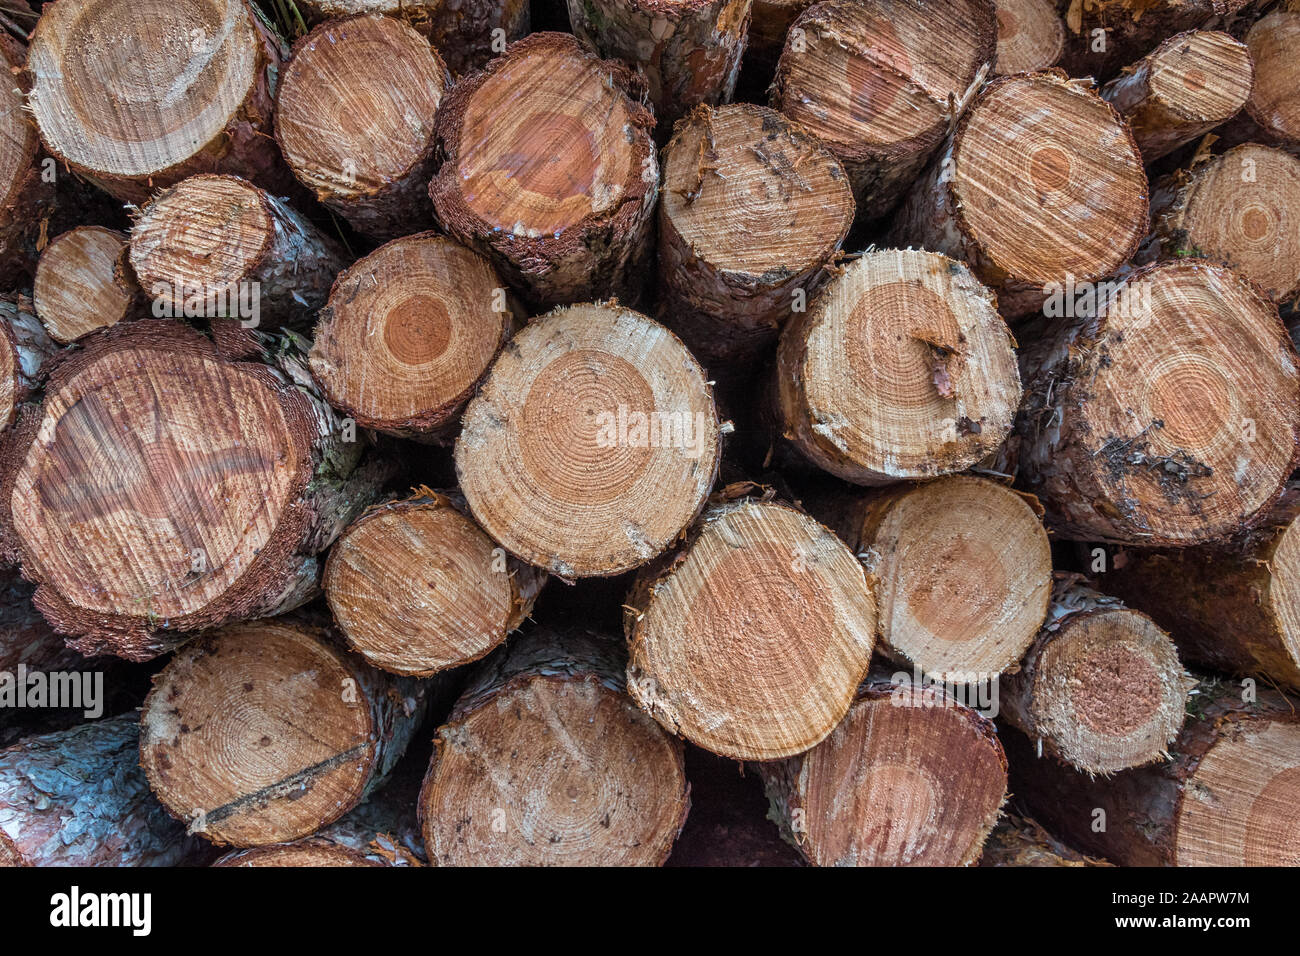 Cut wood in the forrest Stock Photo